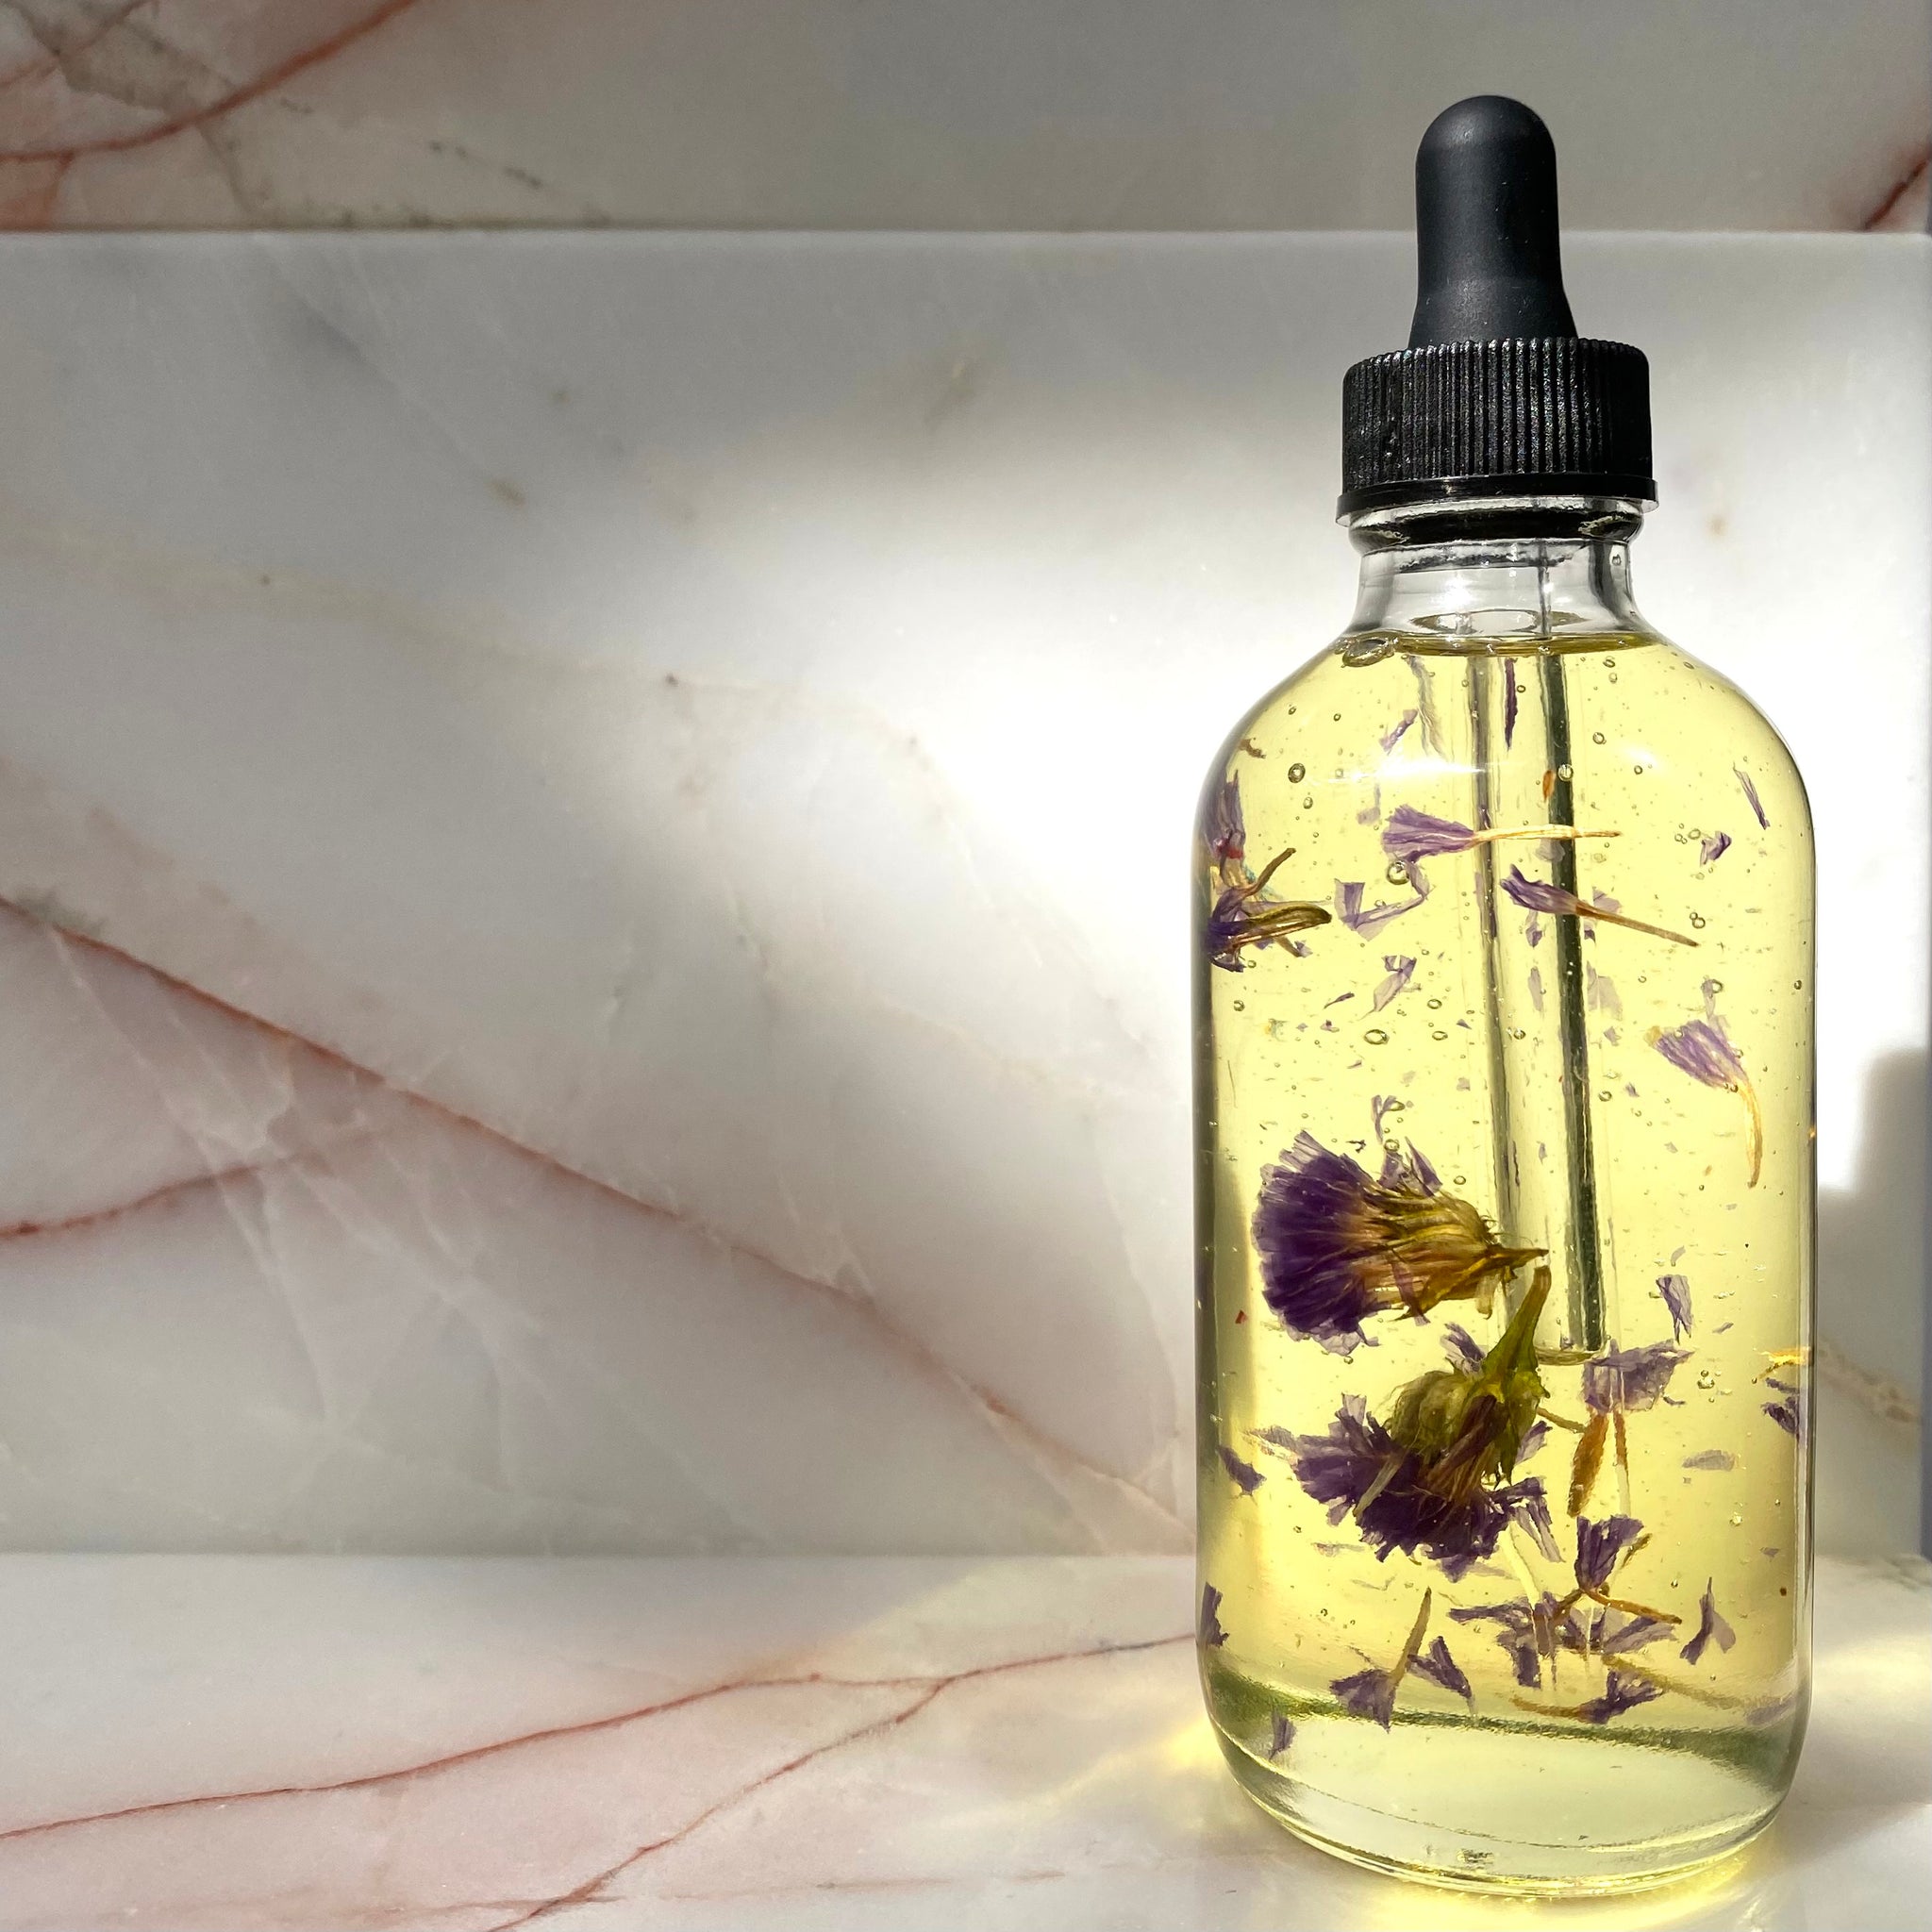 Rose High Vibes Infused Body Oil -   Body oil, Scented body oils,  Natural body oils